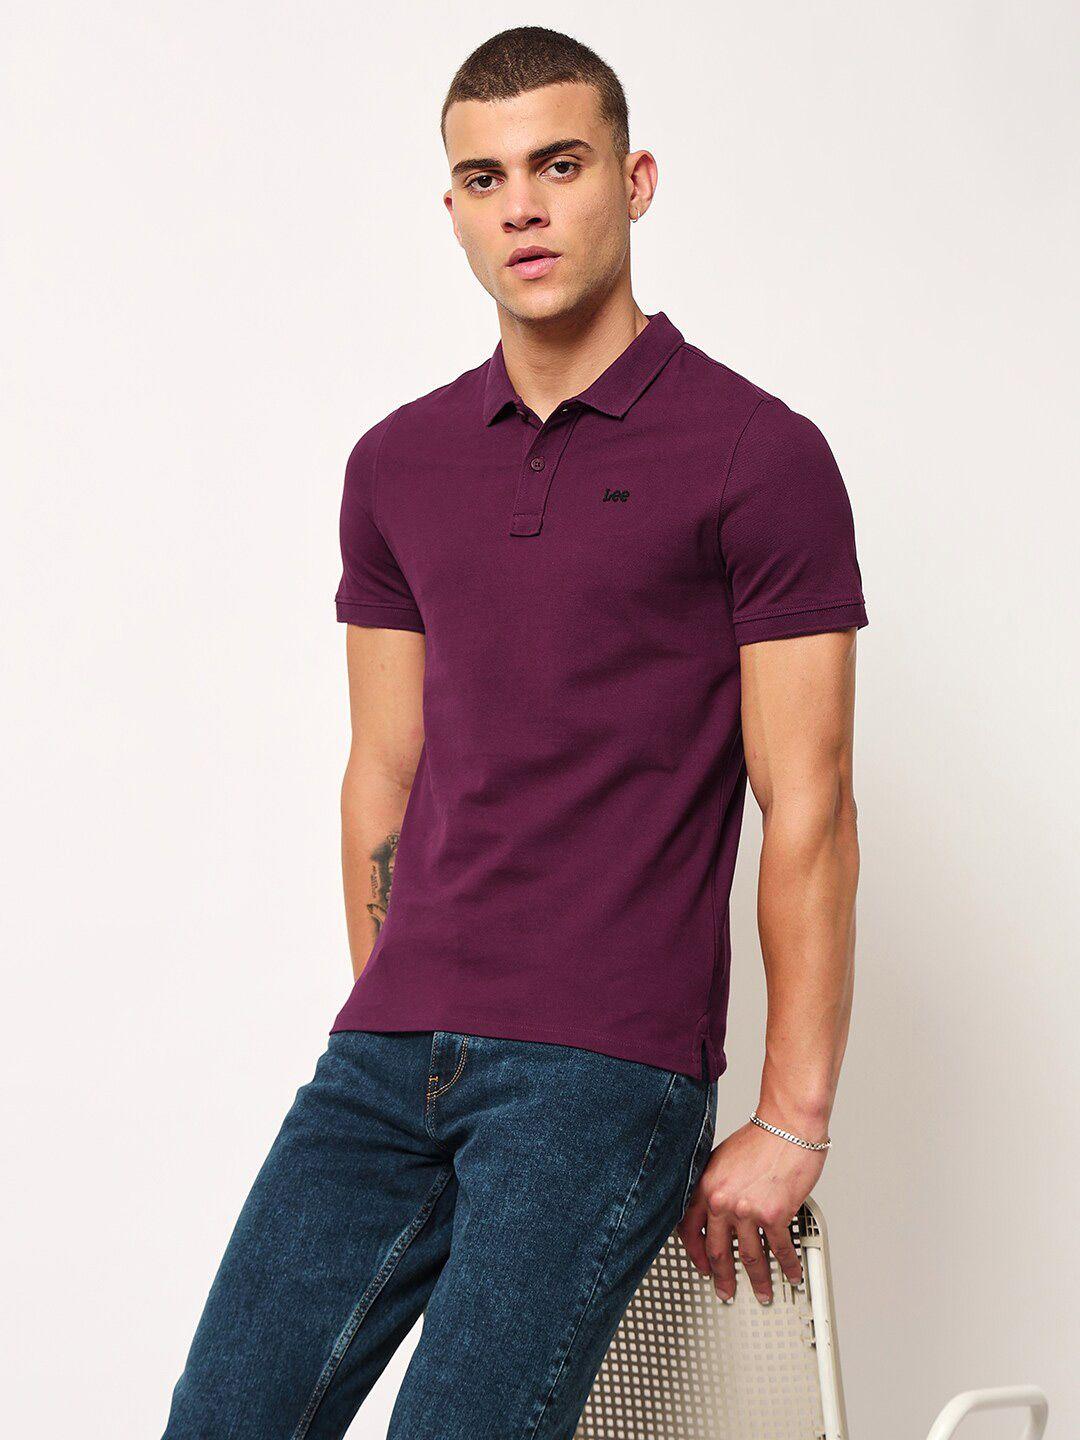 lee polo collar pure cotton slim fit t-shirt